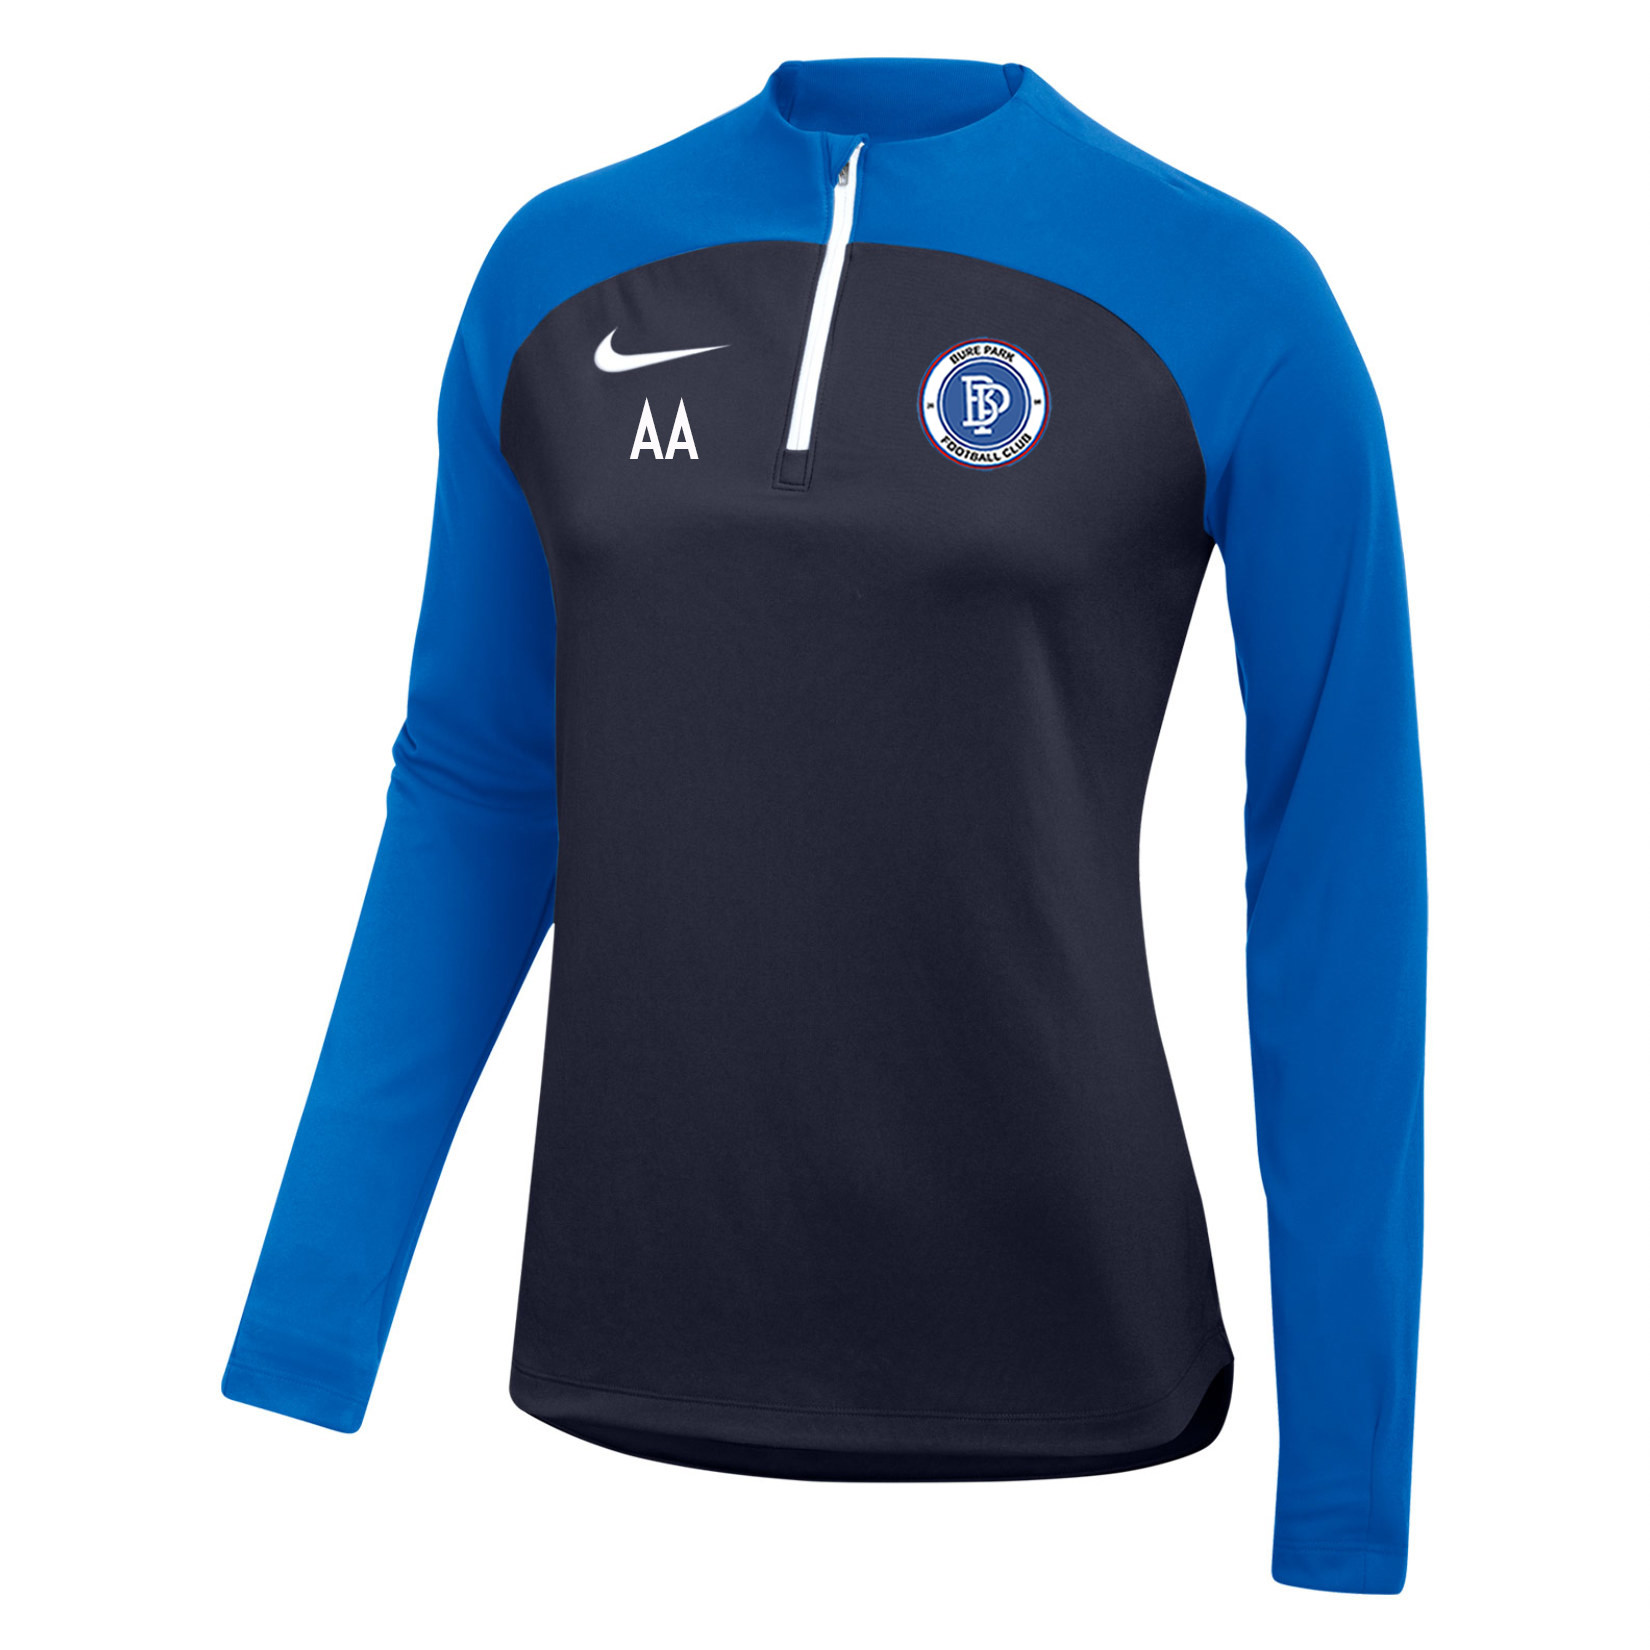 Nike Womens Academy Pro Drill Top Obsidian-Royal Blue-White